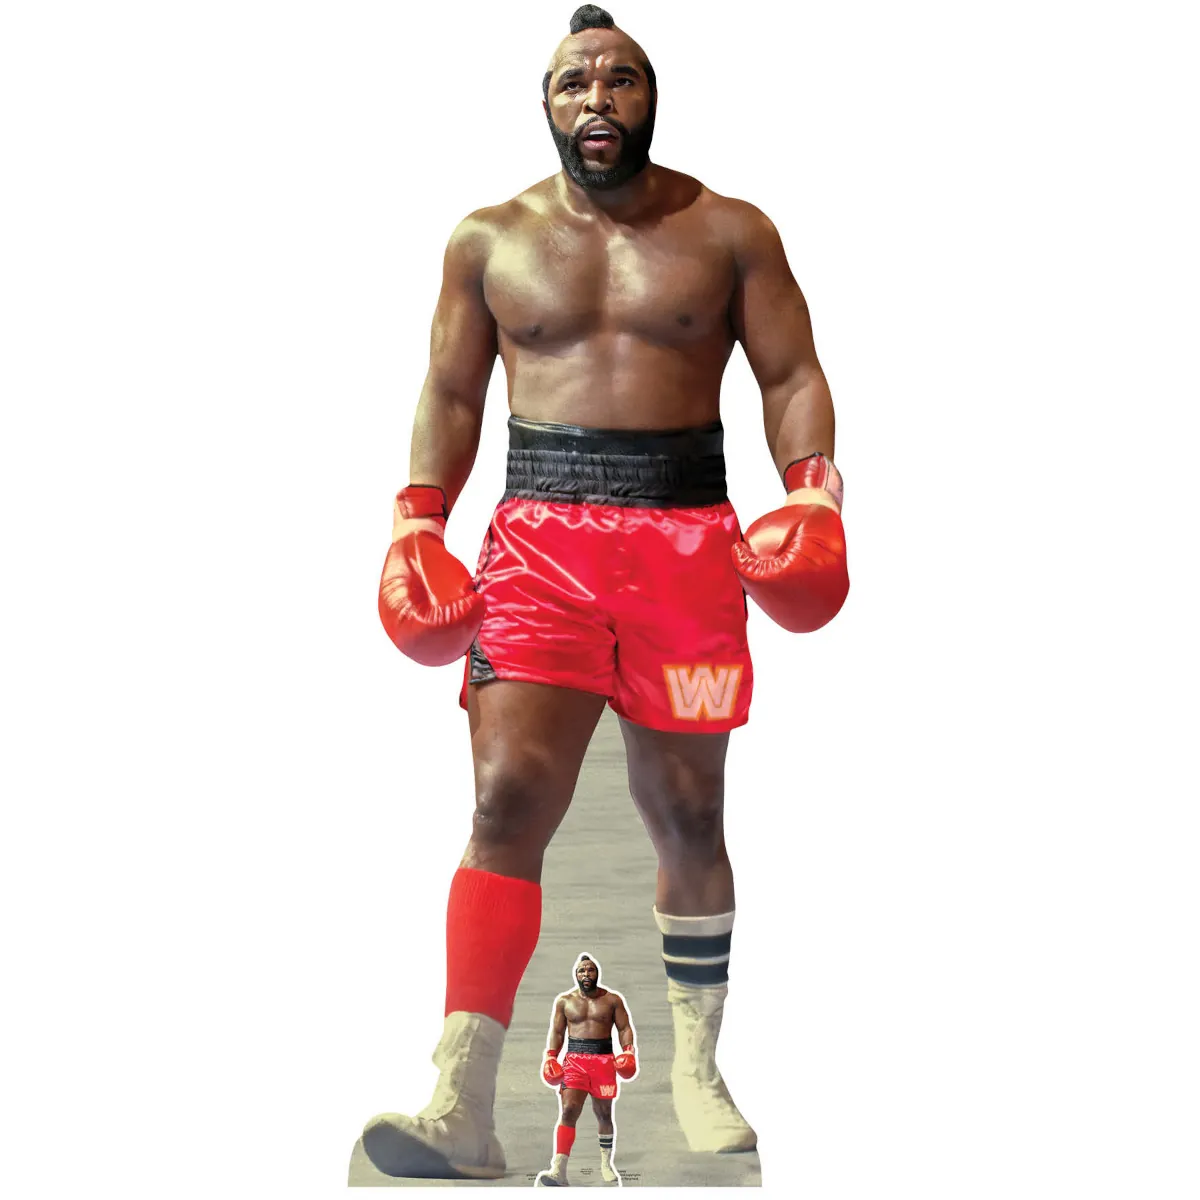 SC4187 Mr. T (American ActorWrestler) (WWE) Official Lifesize + Mini Cardboard Cutout Standee Front